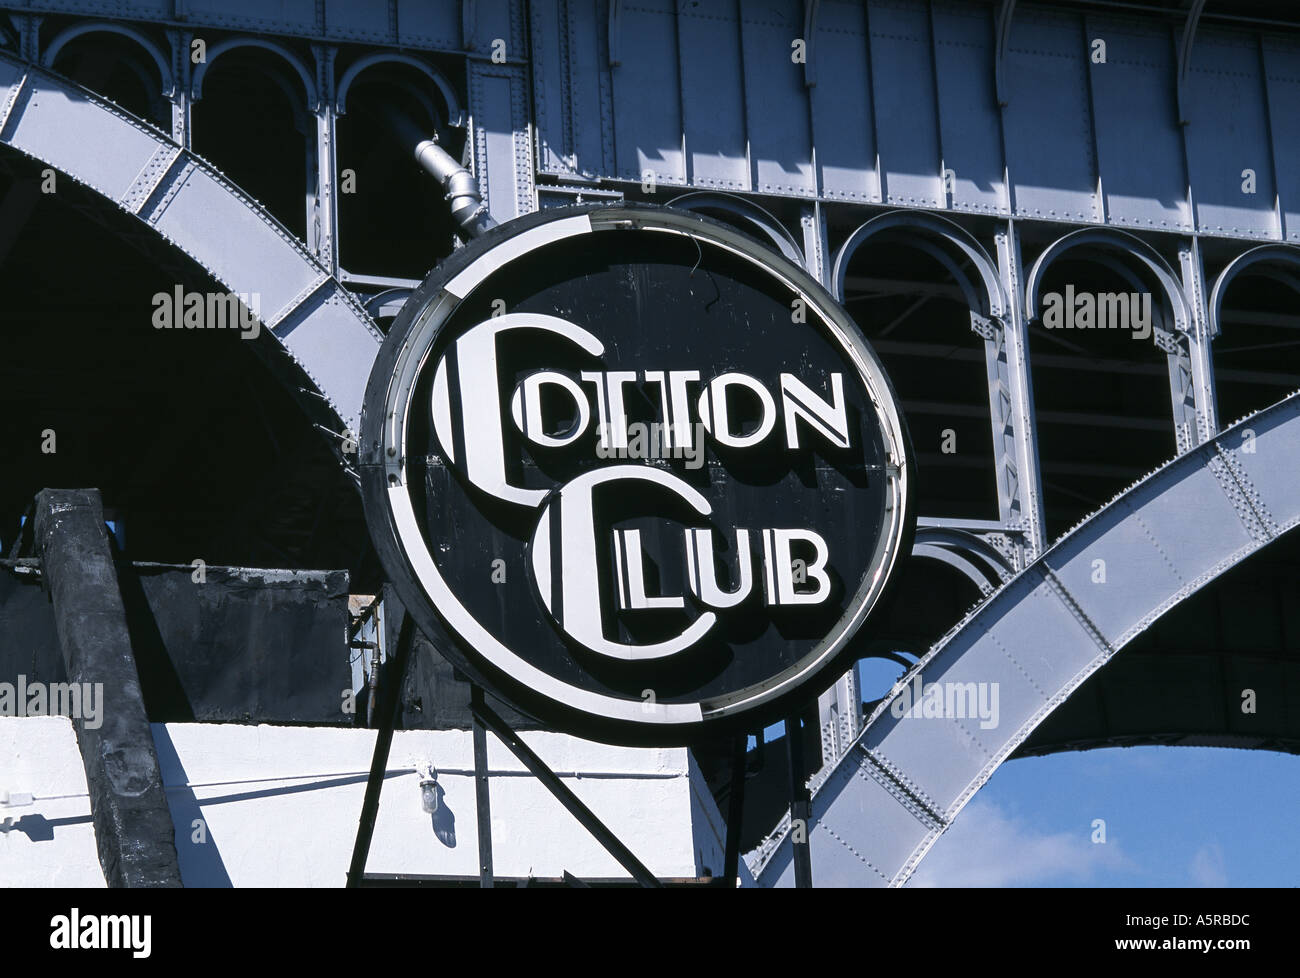 125th Street, Cotton Club, Sign, Day Stock Photo